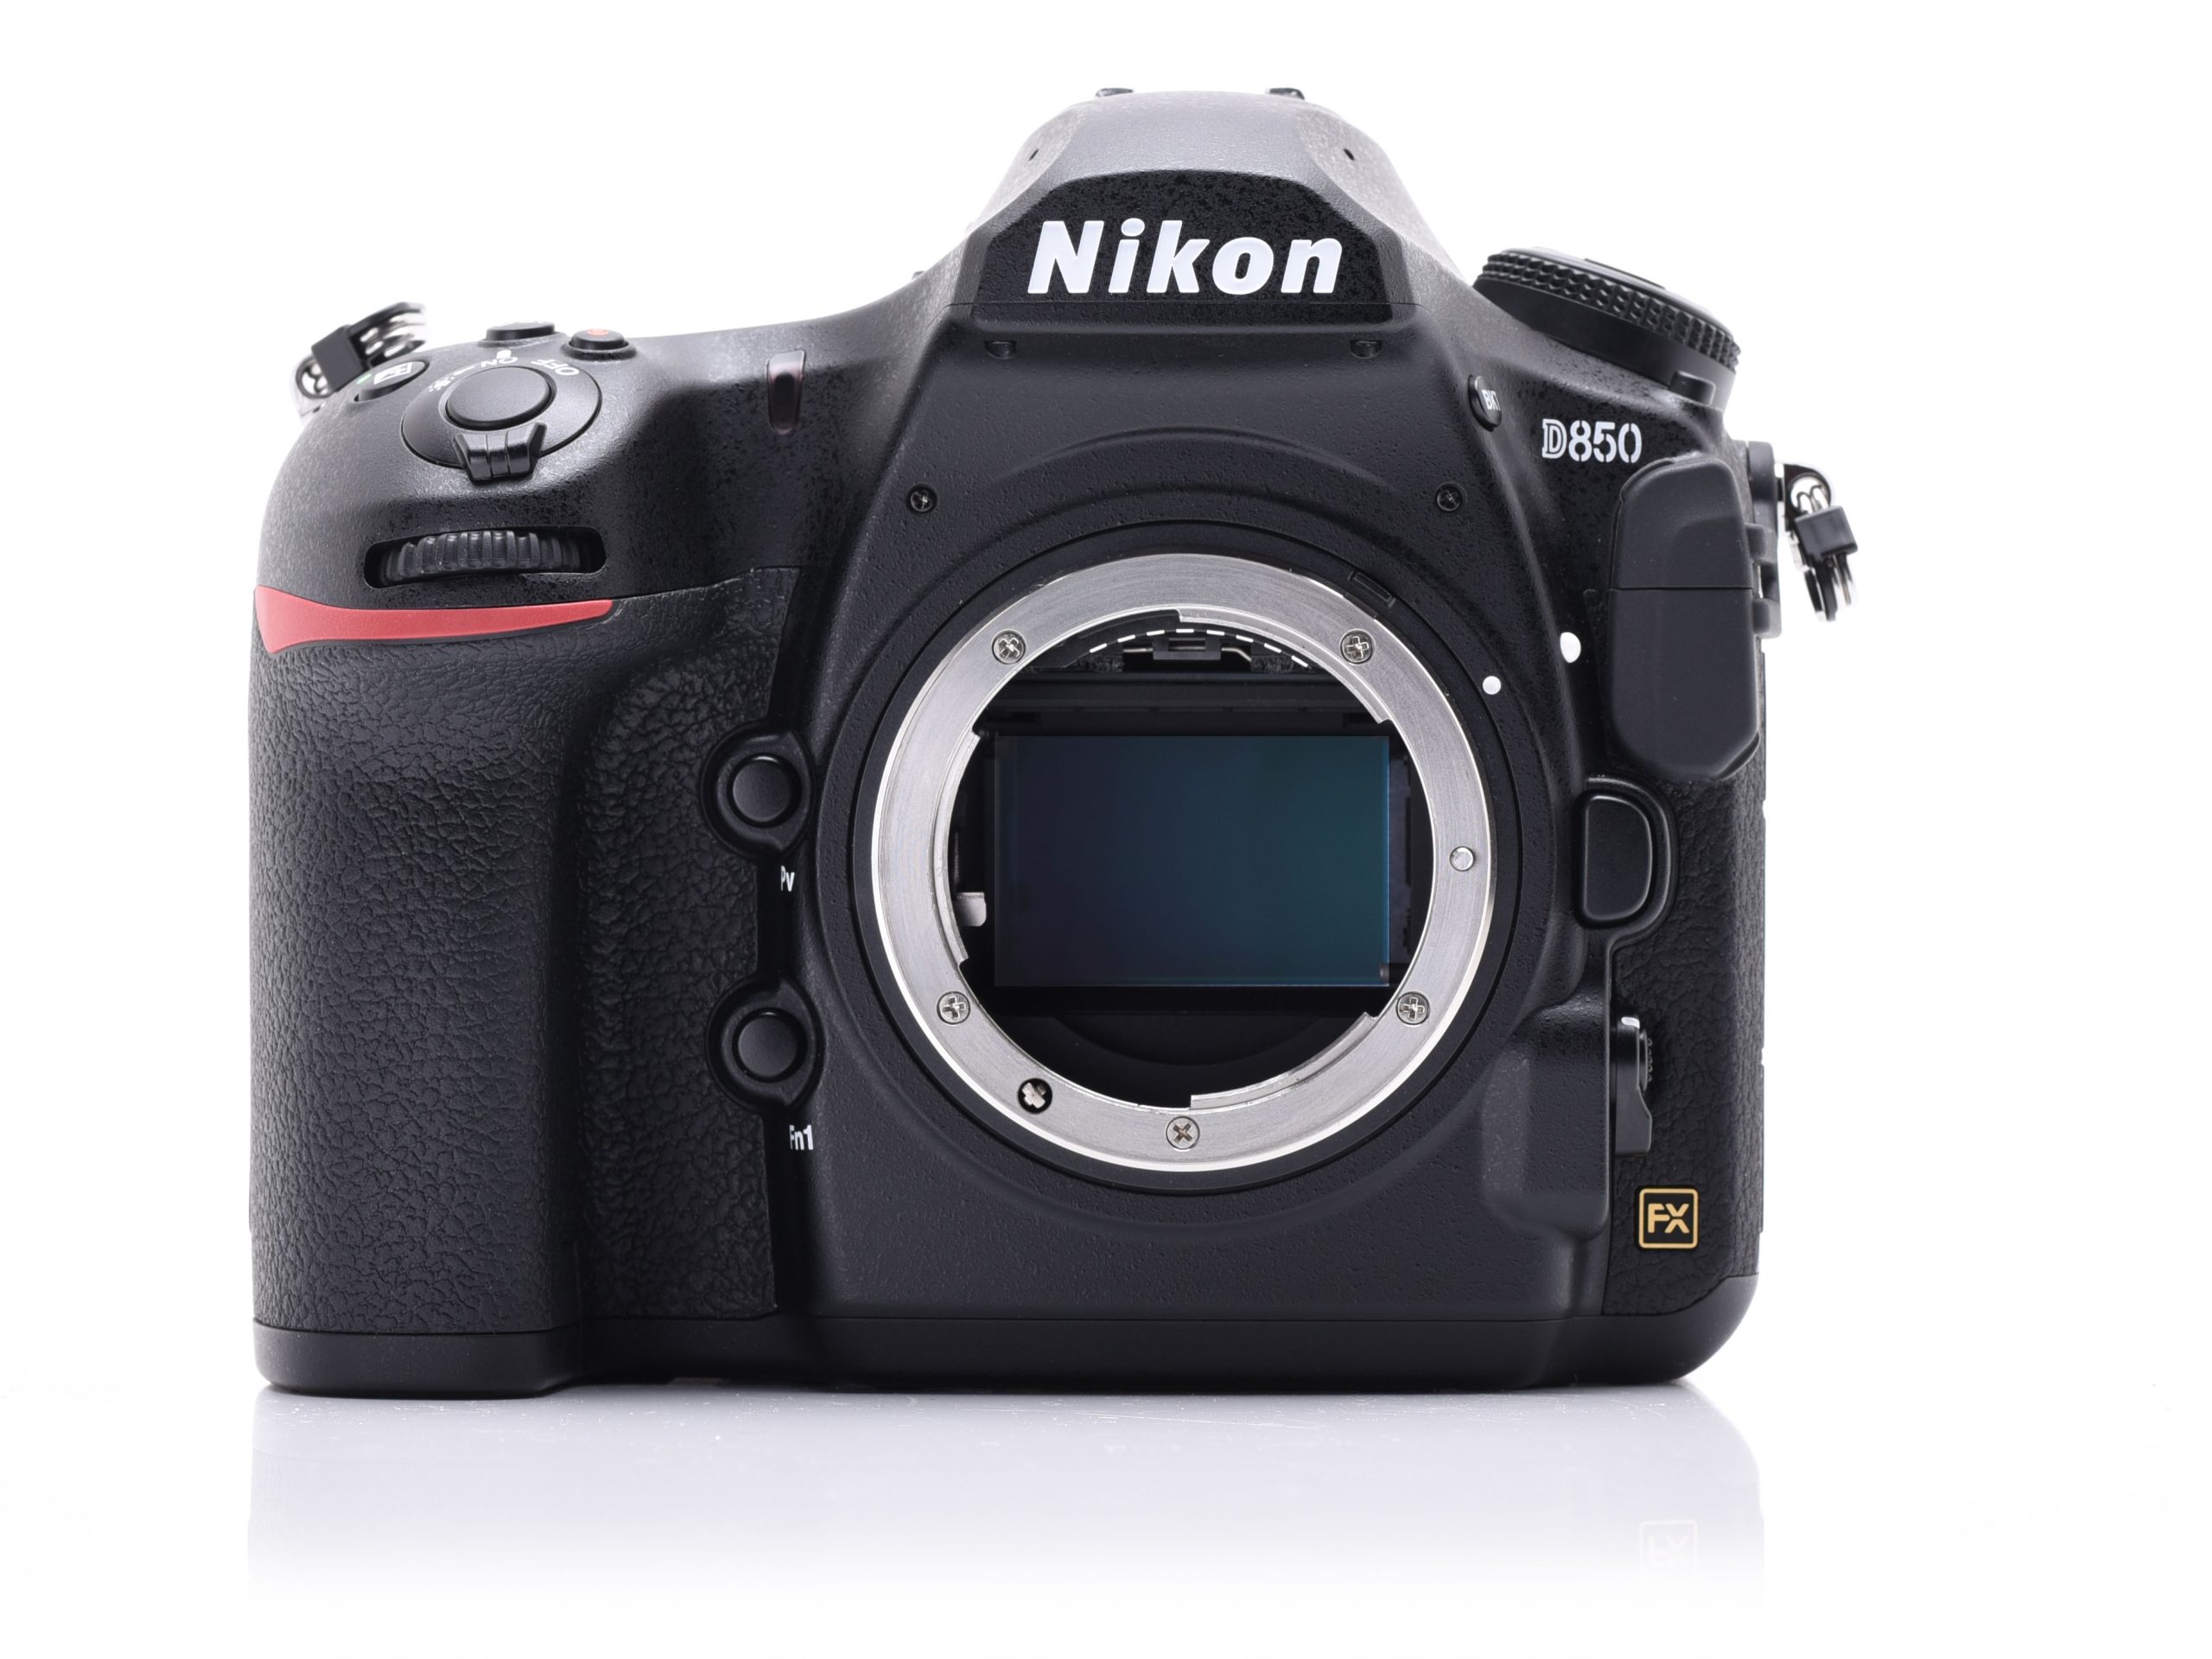 Nikon D850 for Real Estate Photography